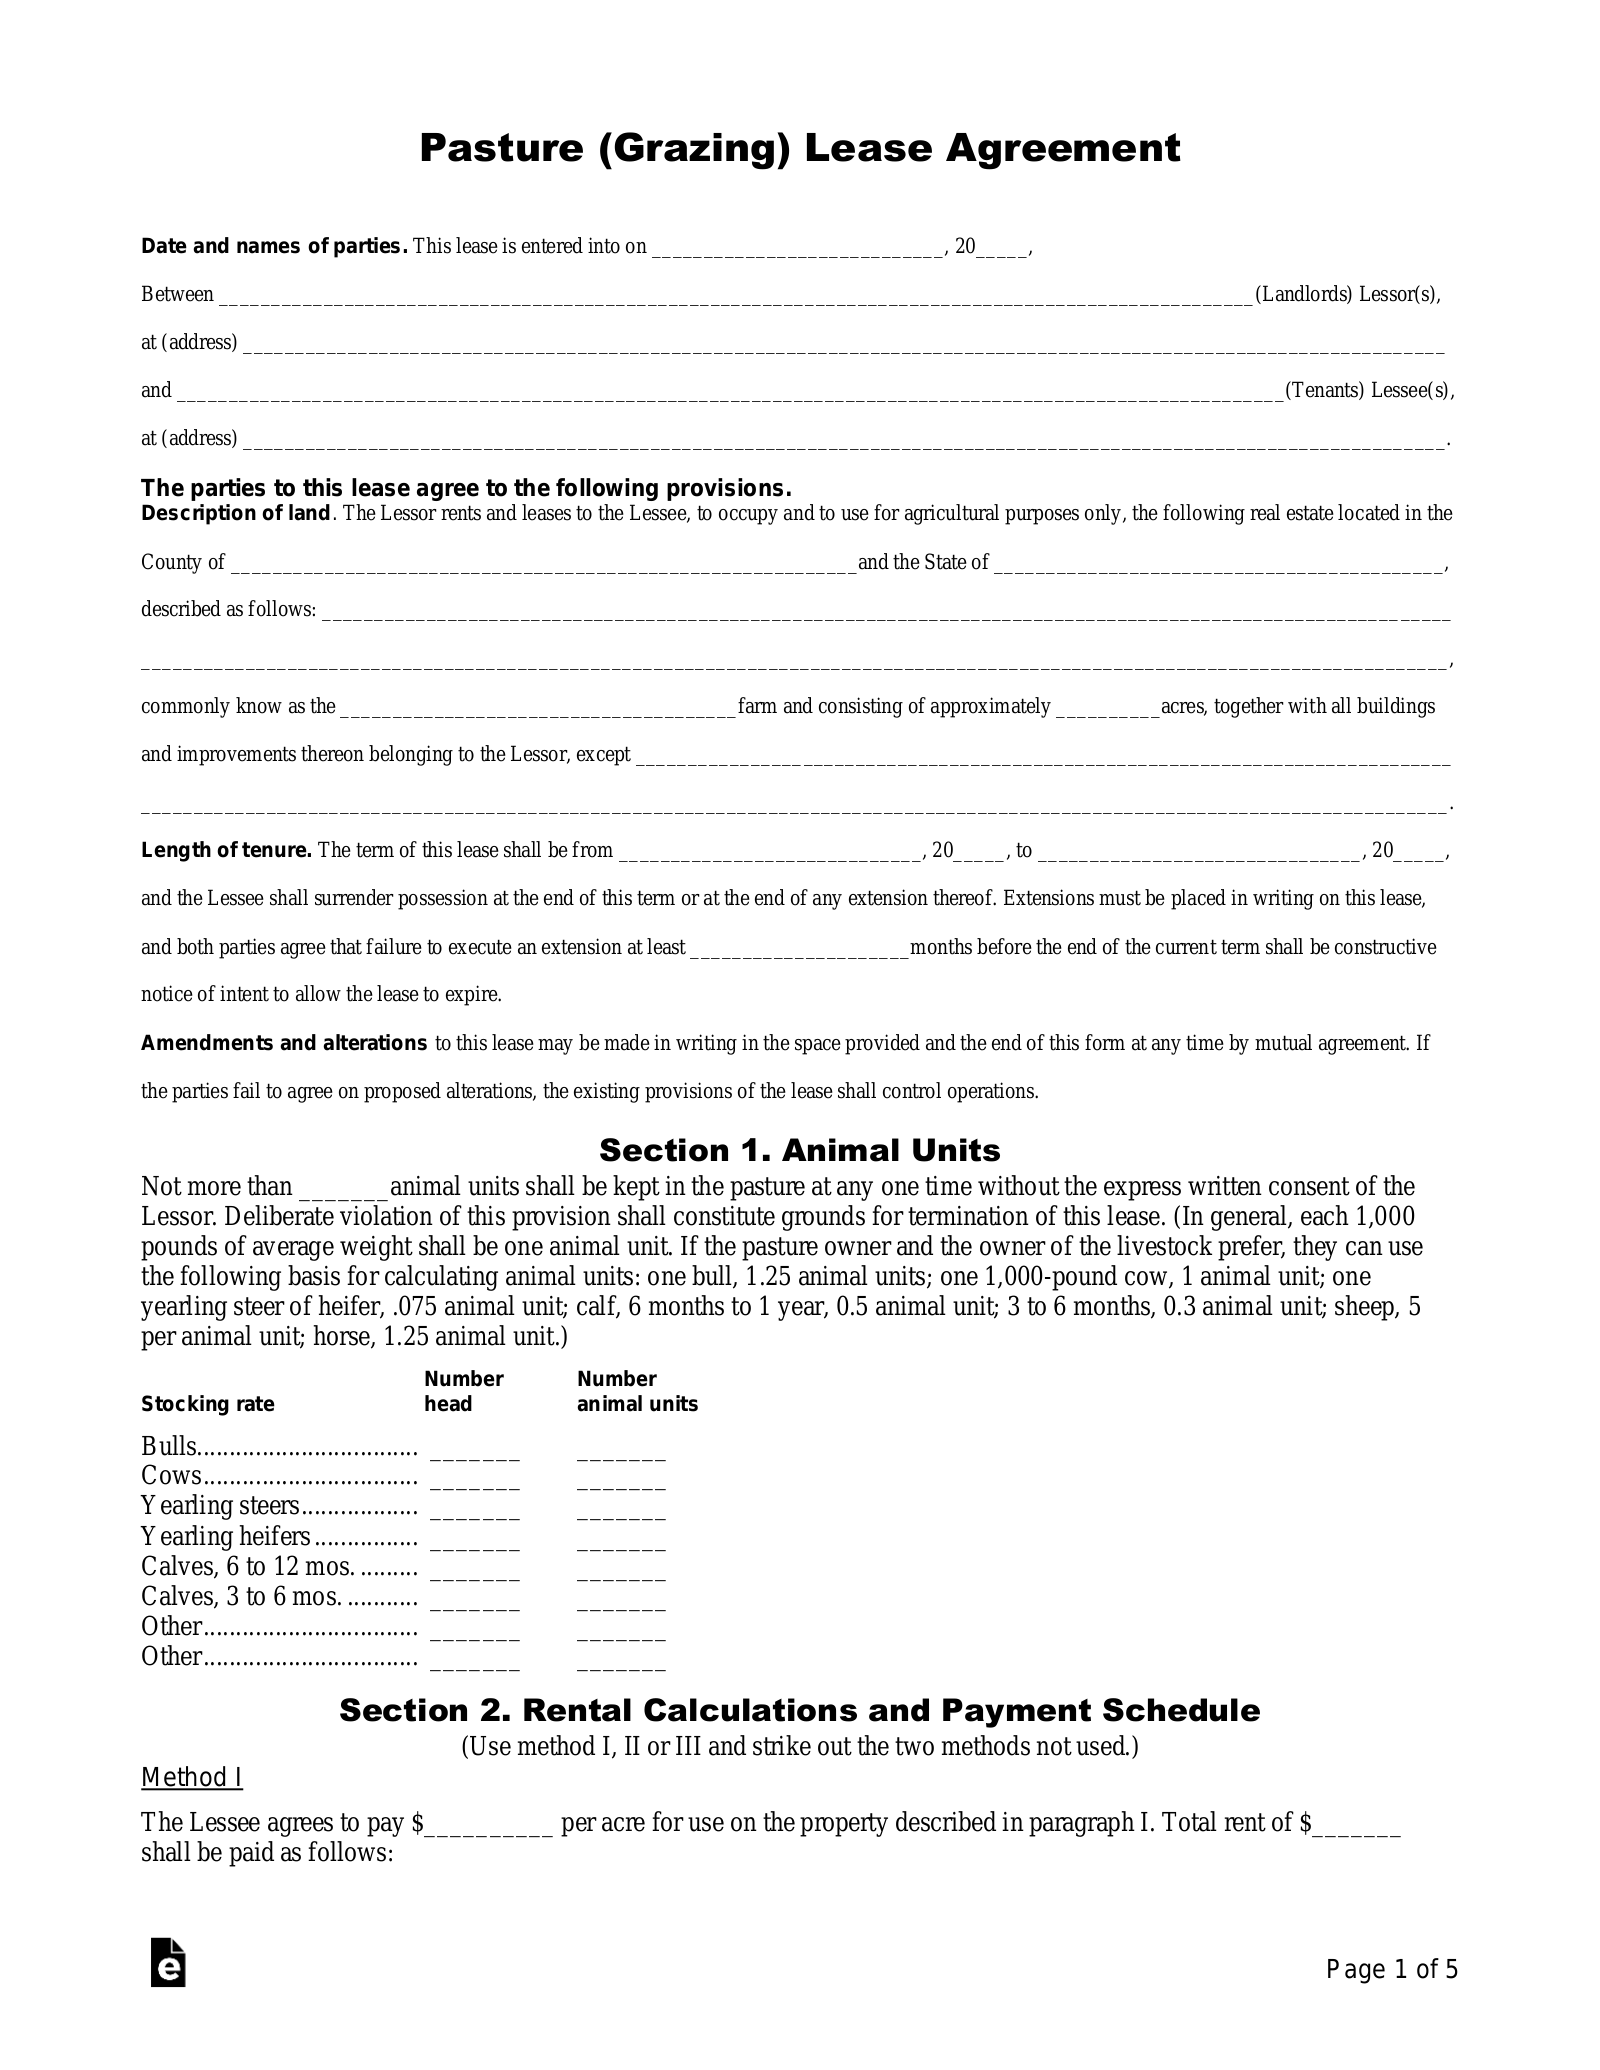 Free Pasture Grazing Rental Lease Agreement Template PDF Word 